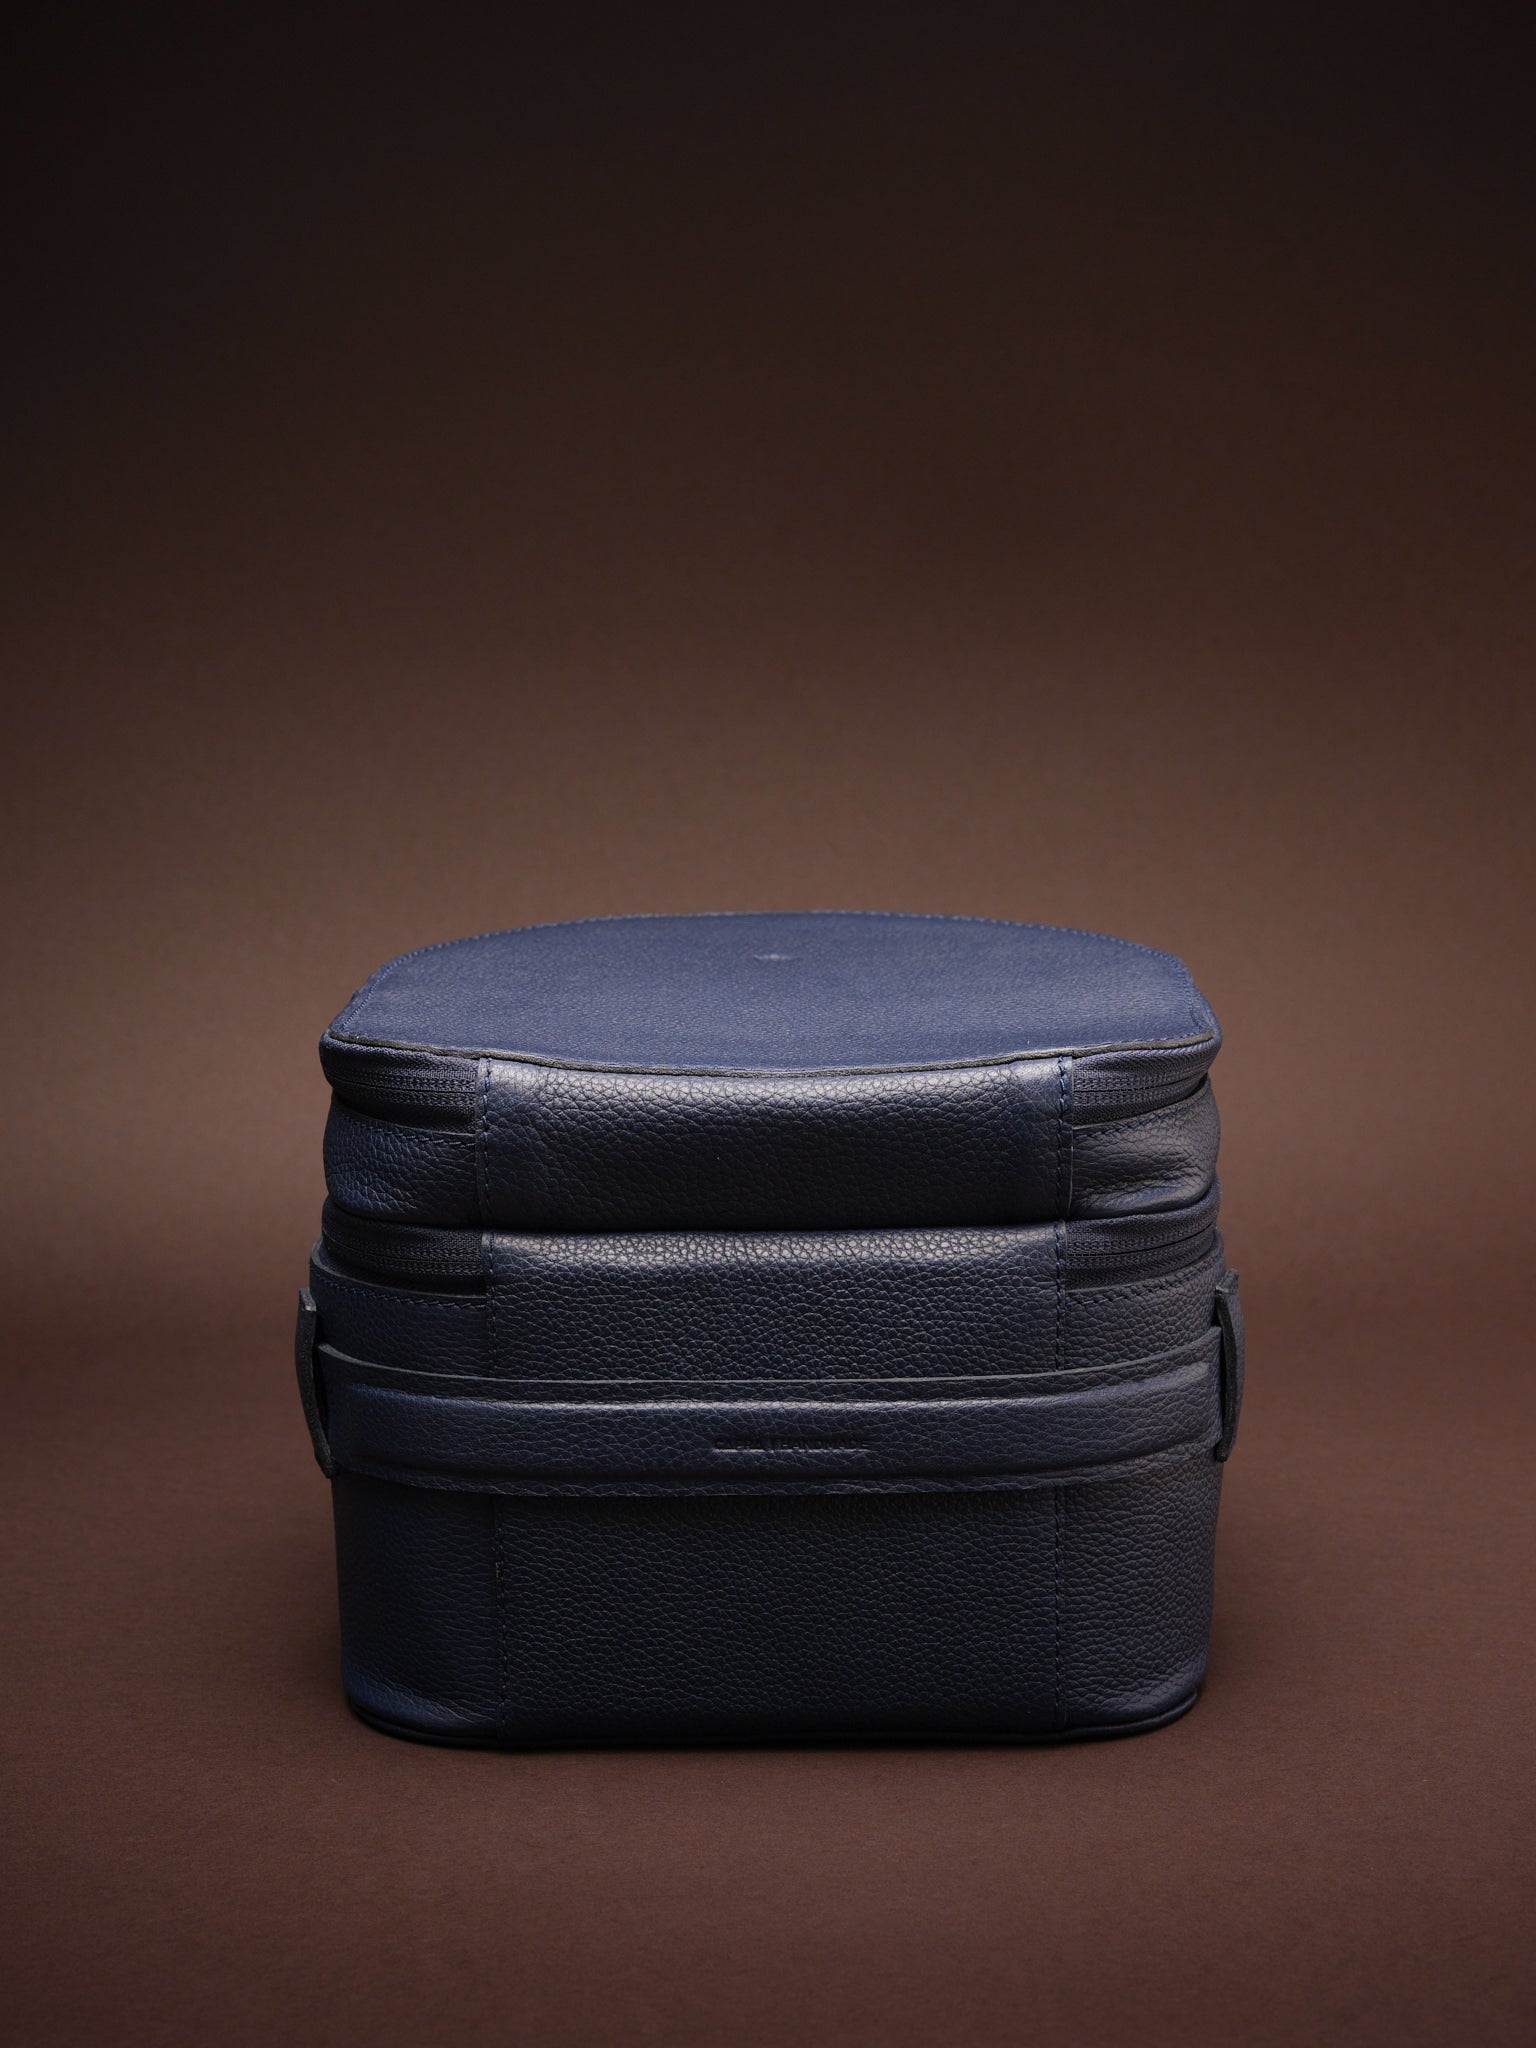 Leather Handle. Apple AR Headset Case Navy by Capra Leather